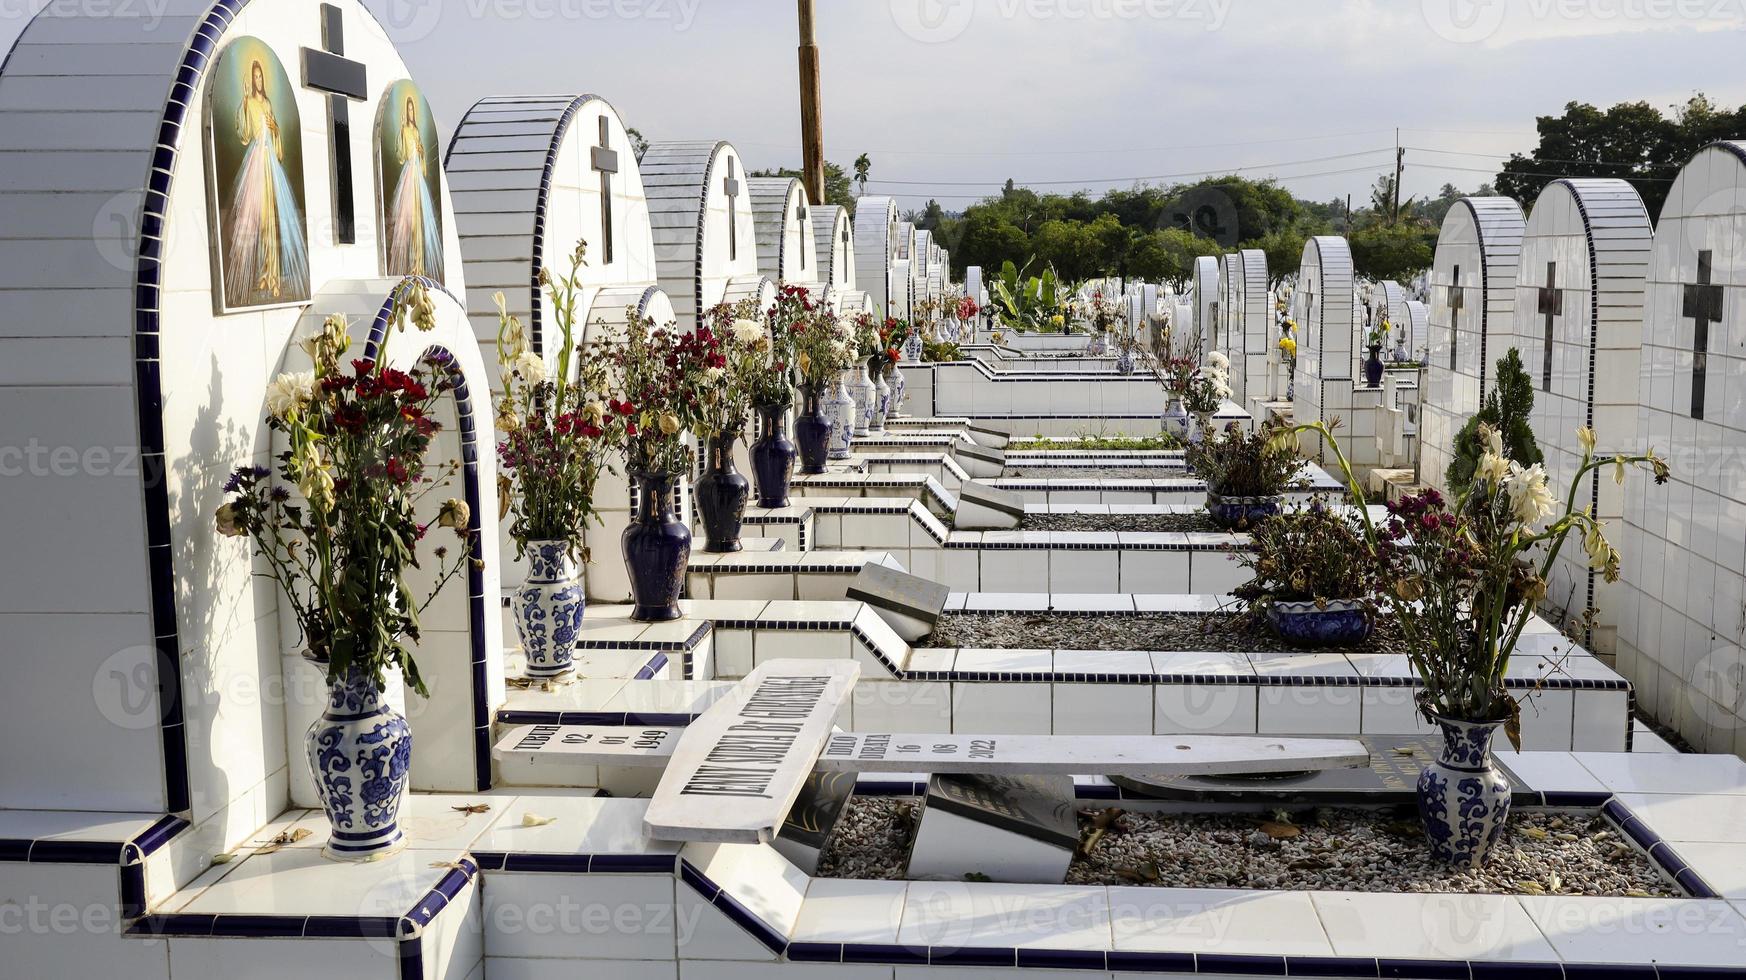 The public cemetery contains identical white ceramic graves with flowers. photo